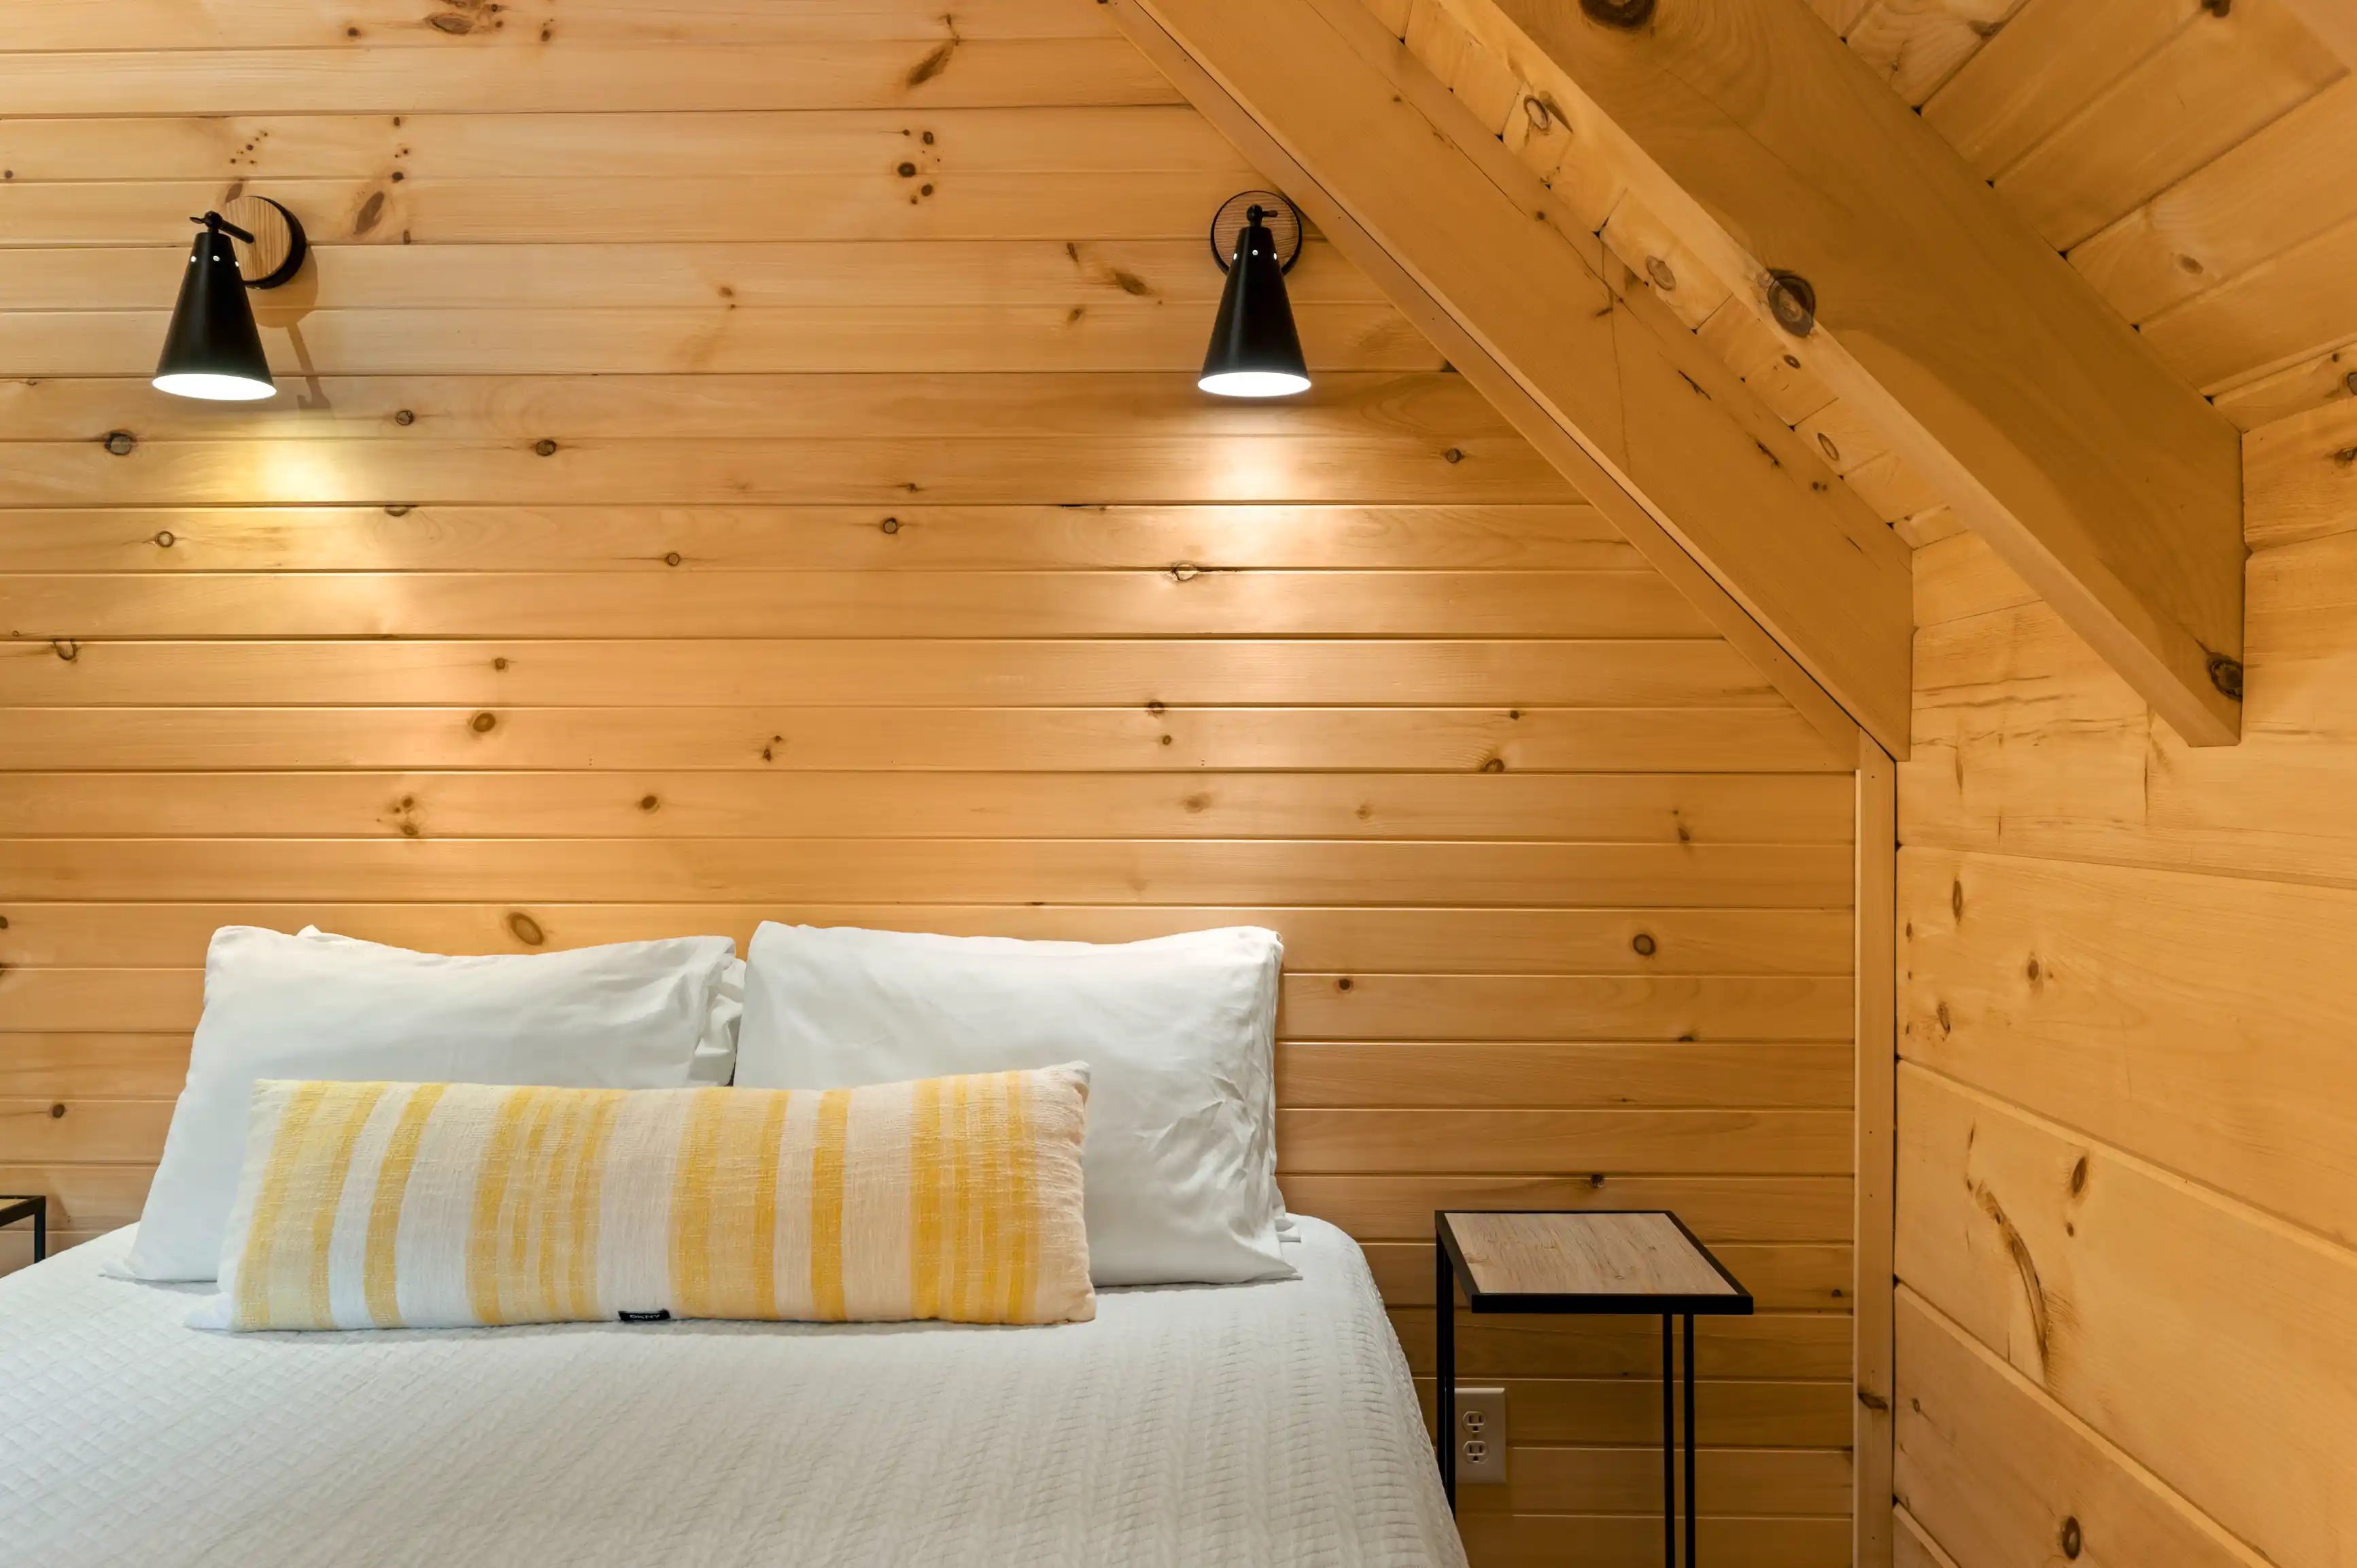 Cozy bedroom interior with white bedding, a yellow striped pillow, wooden walls, and wall-mounted lights.